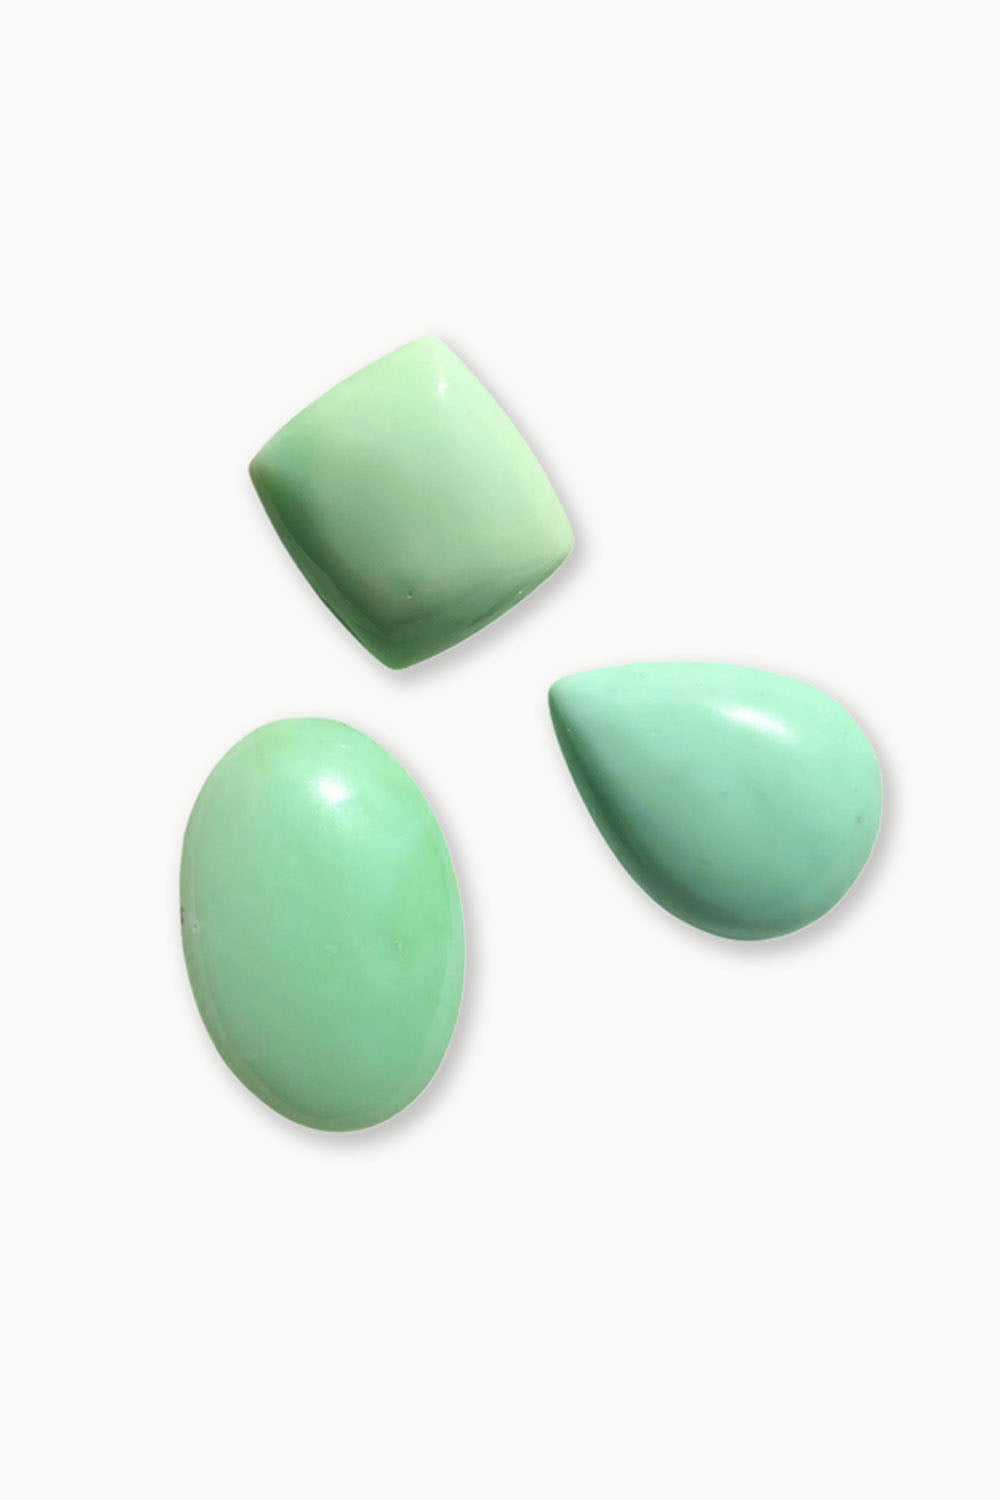 Green Opal Indonesia Cabochon